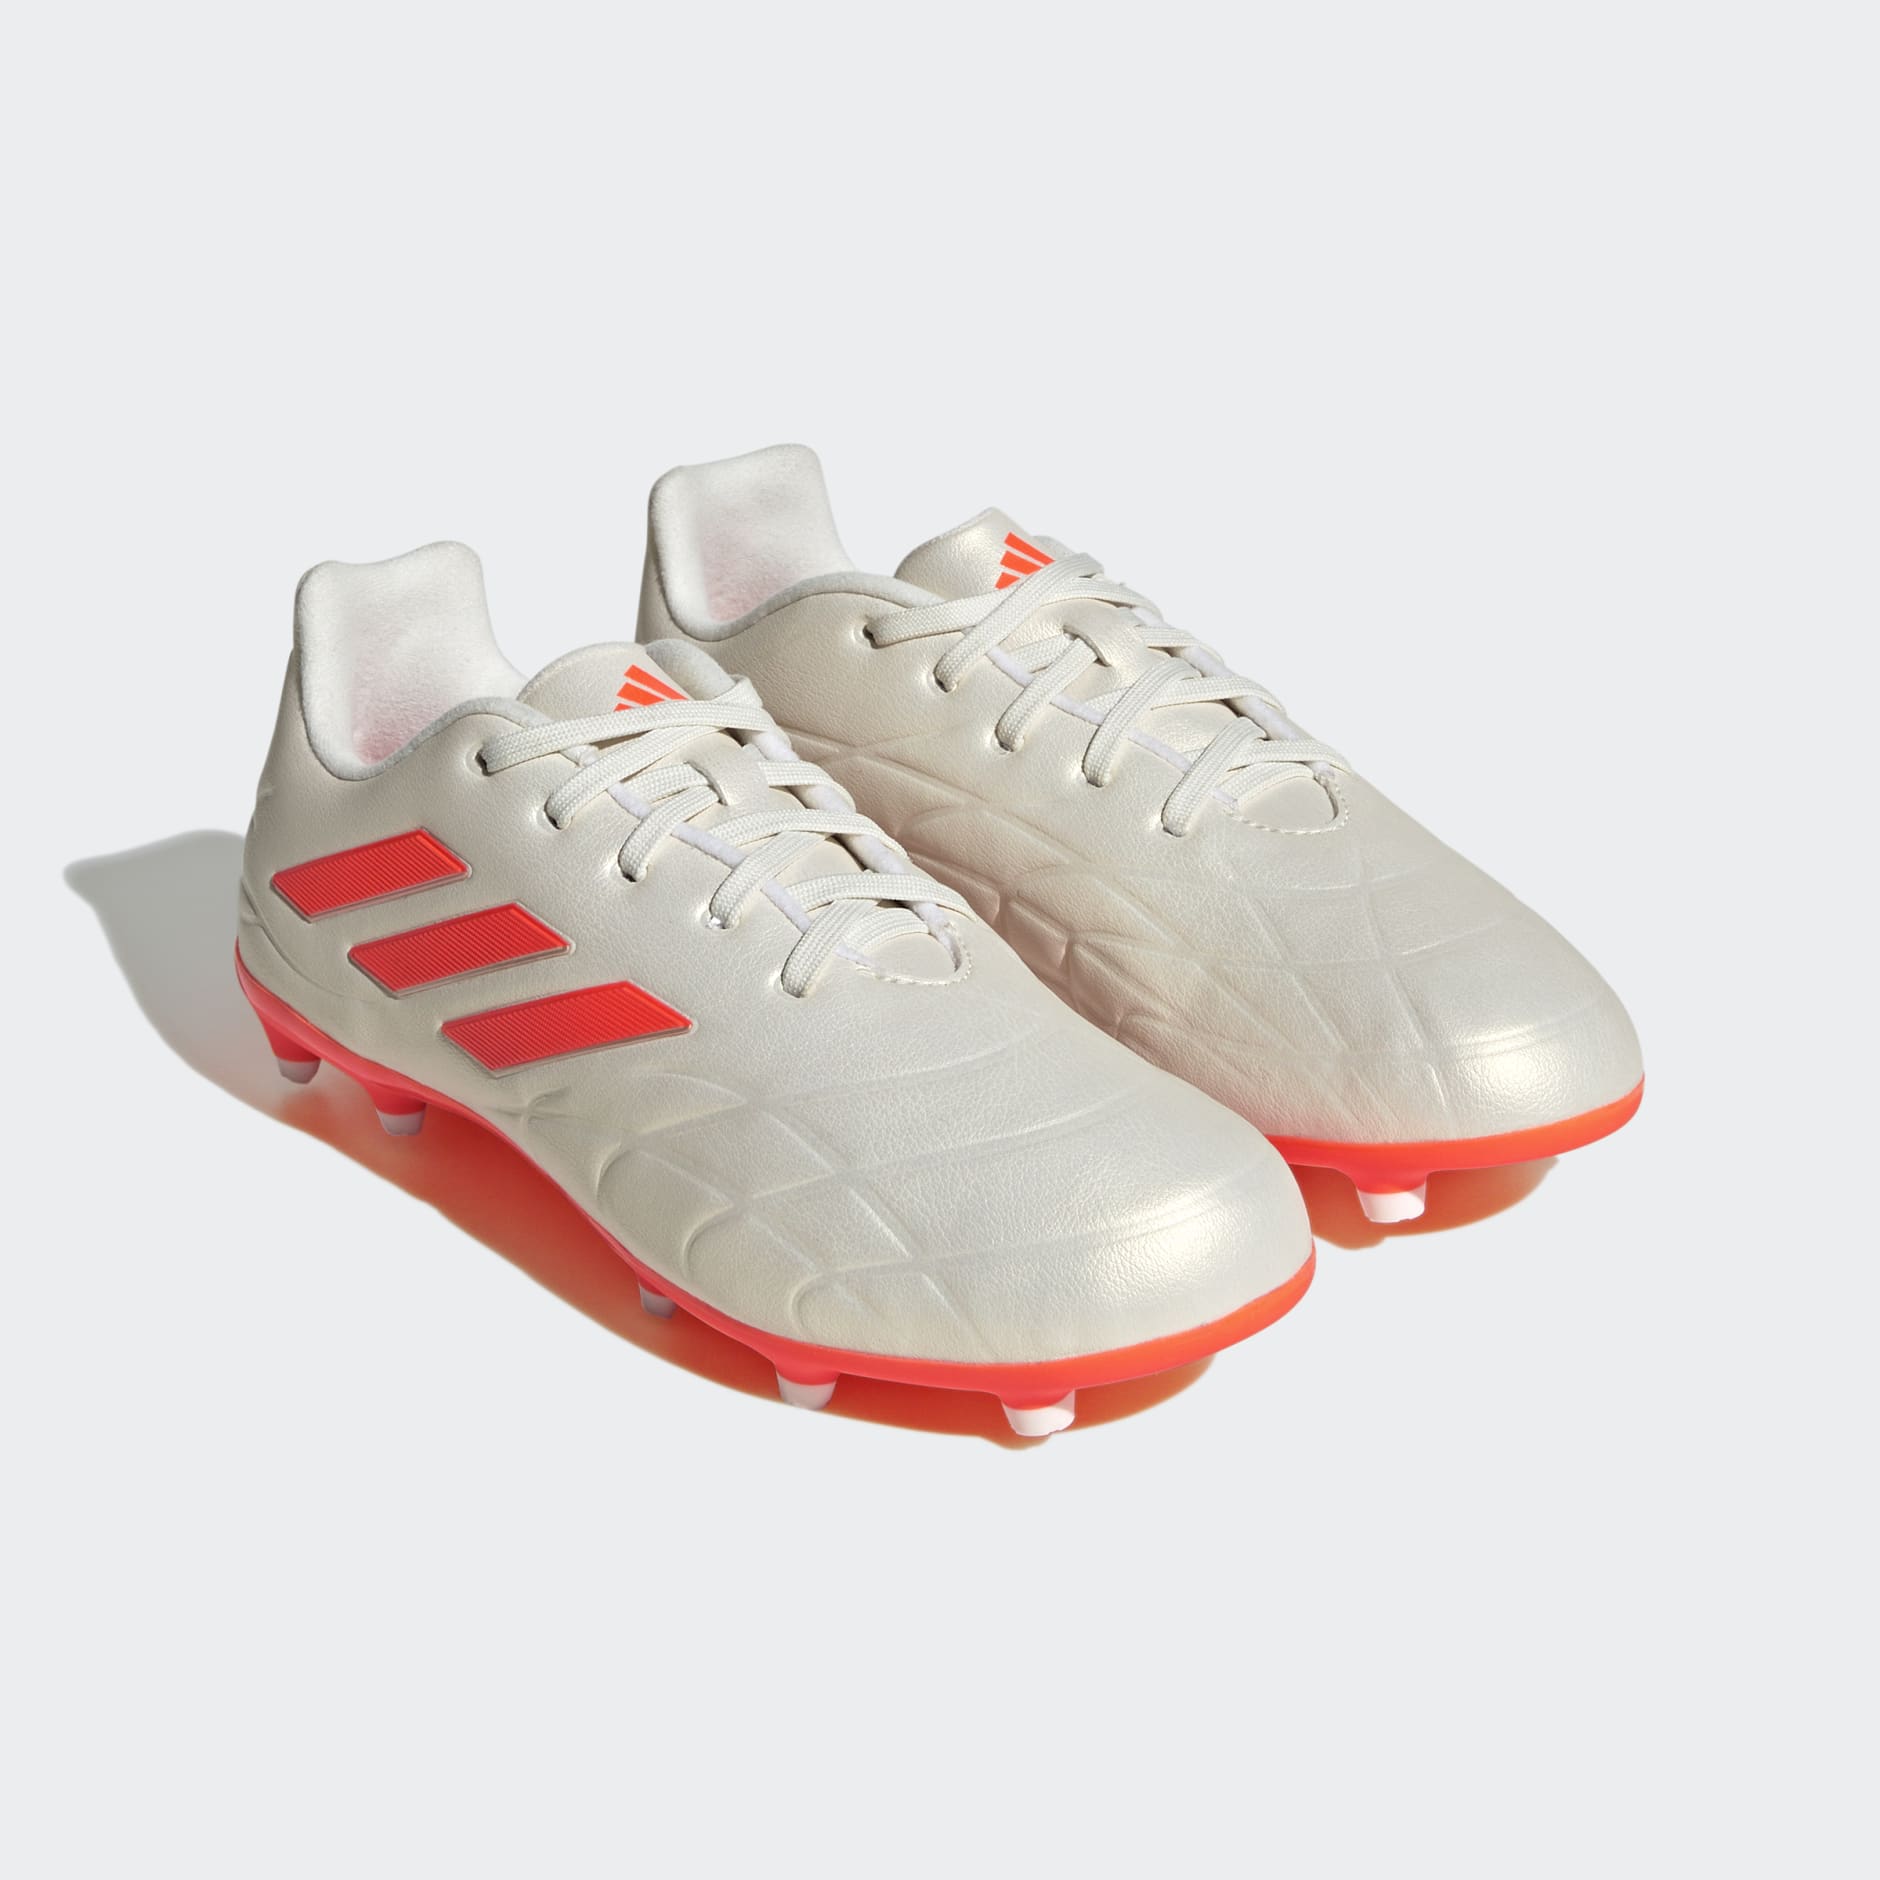 Shoes - Copa Pure.3 Firm Ground Boots - White | adidas South Africa